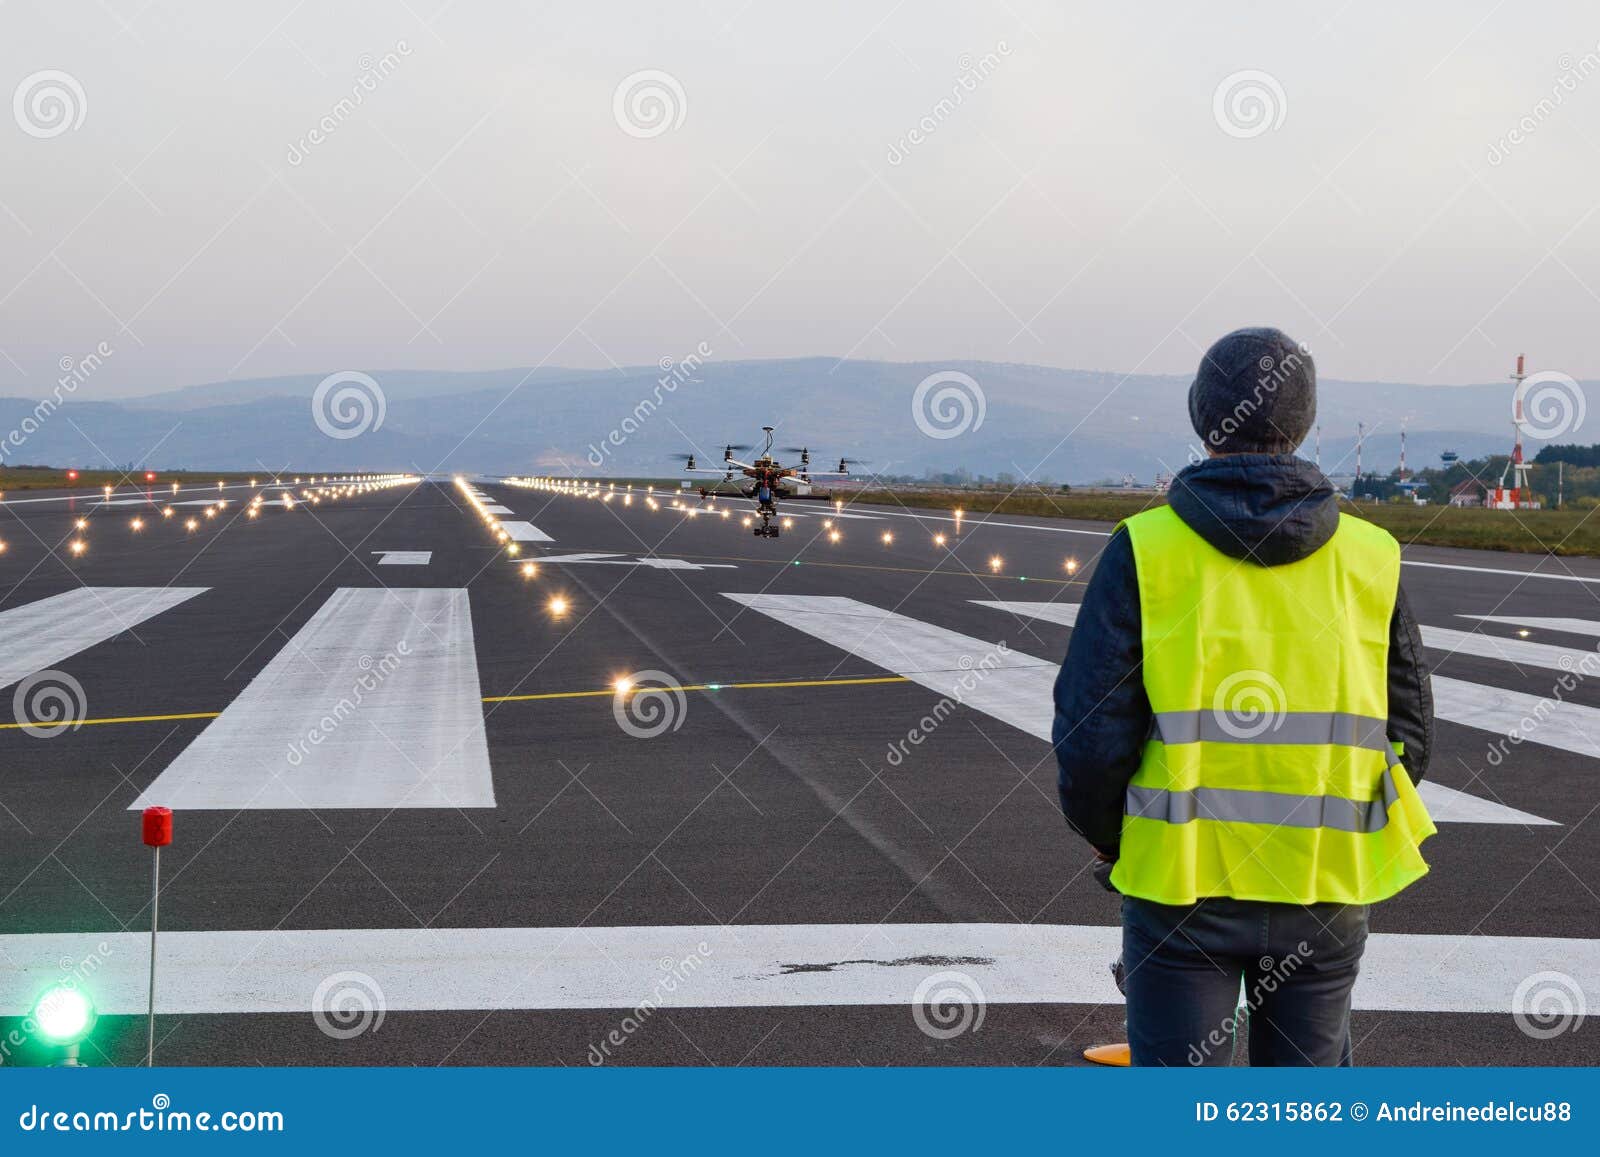 drone inspection over airport runway with operator